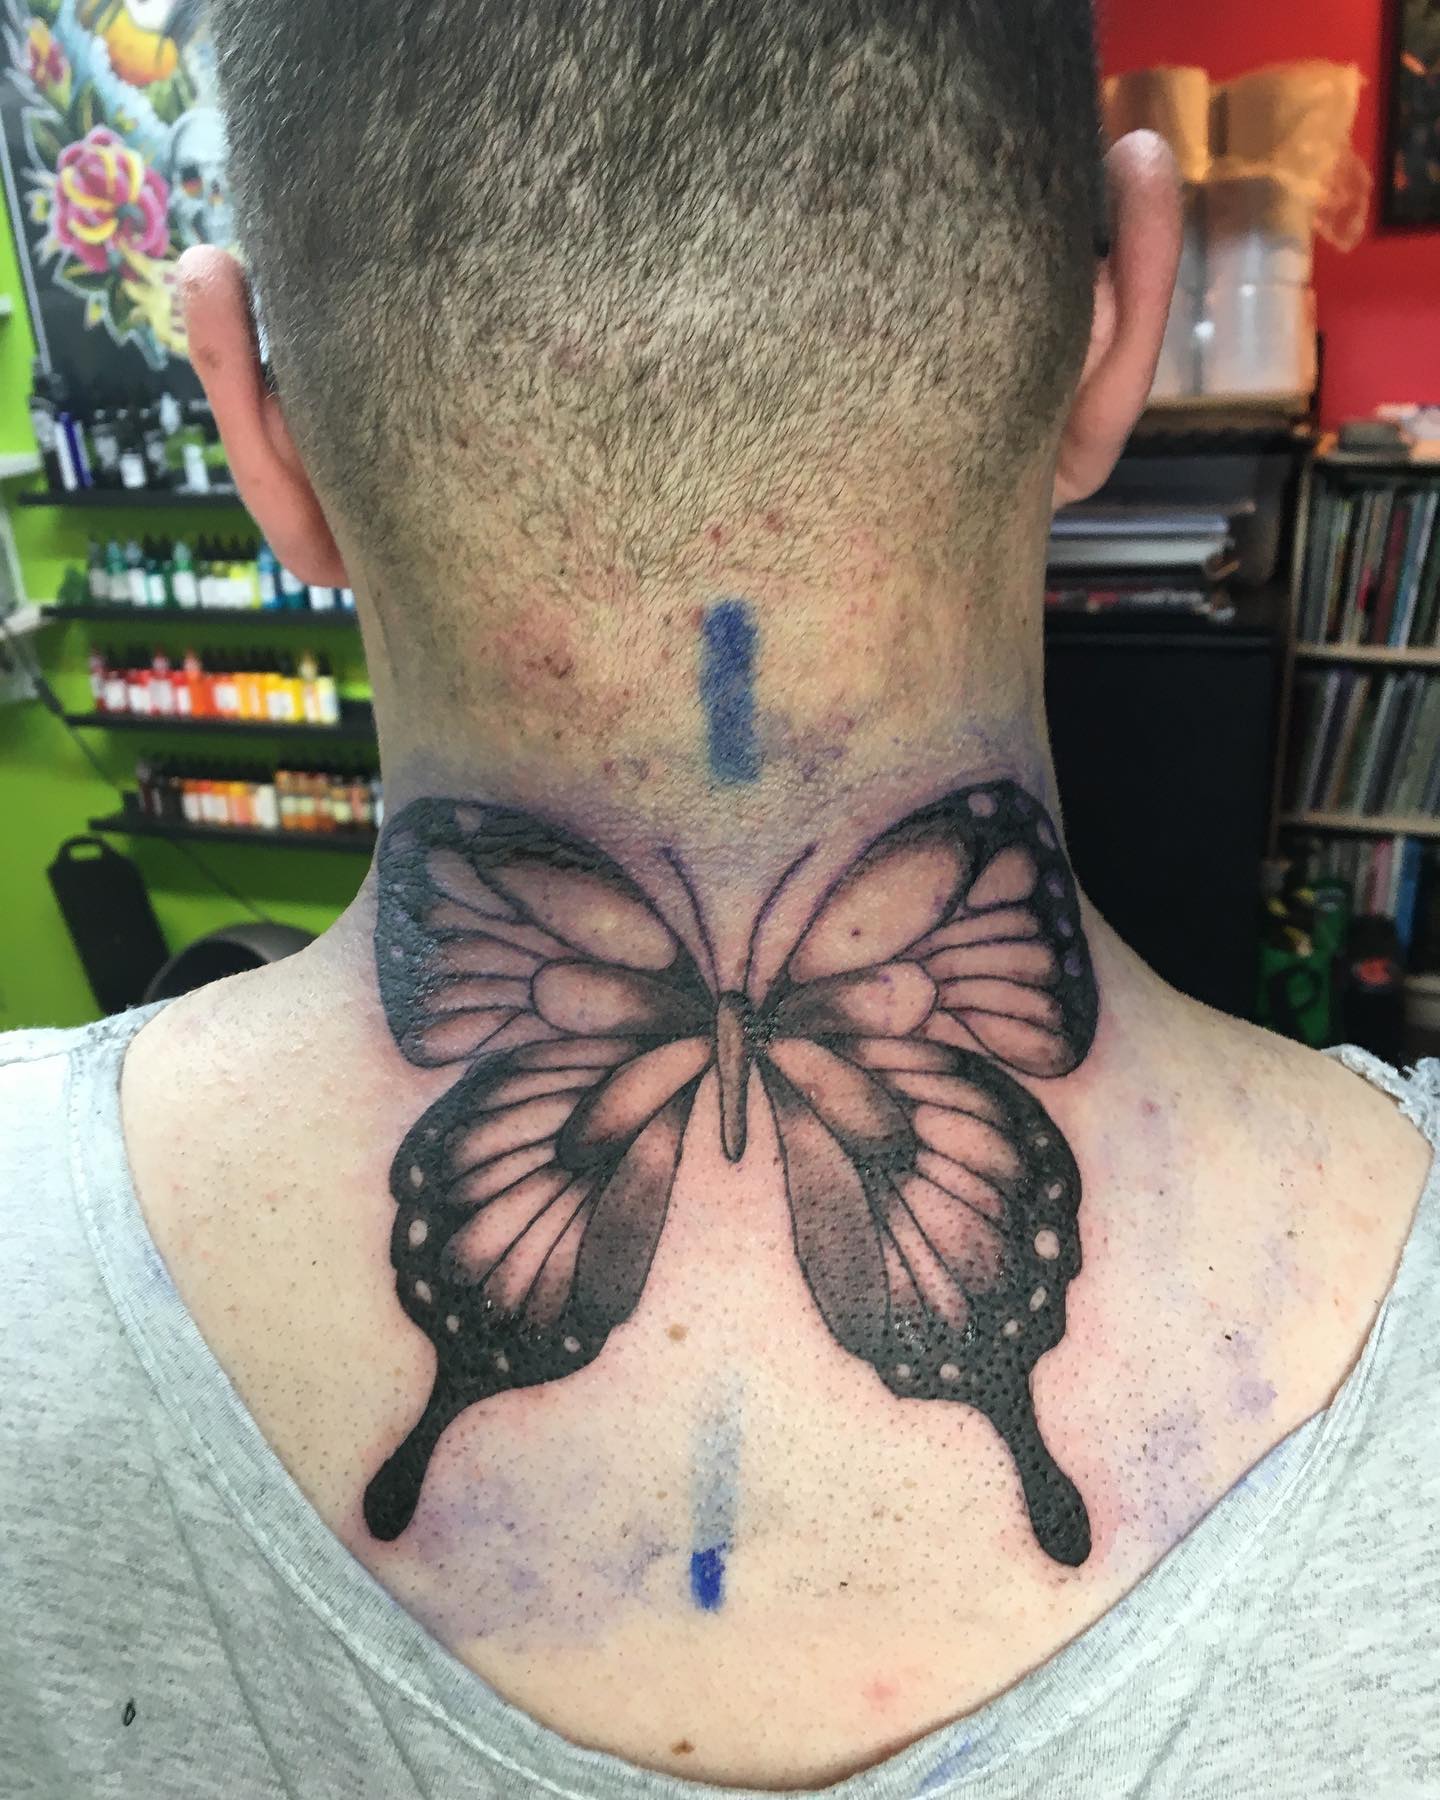 A woman with a butterfly tattoo on her back photo  Free Étatsunis Image  on Unsplash